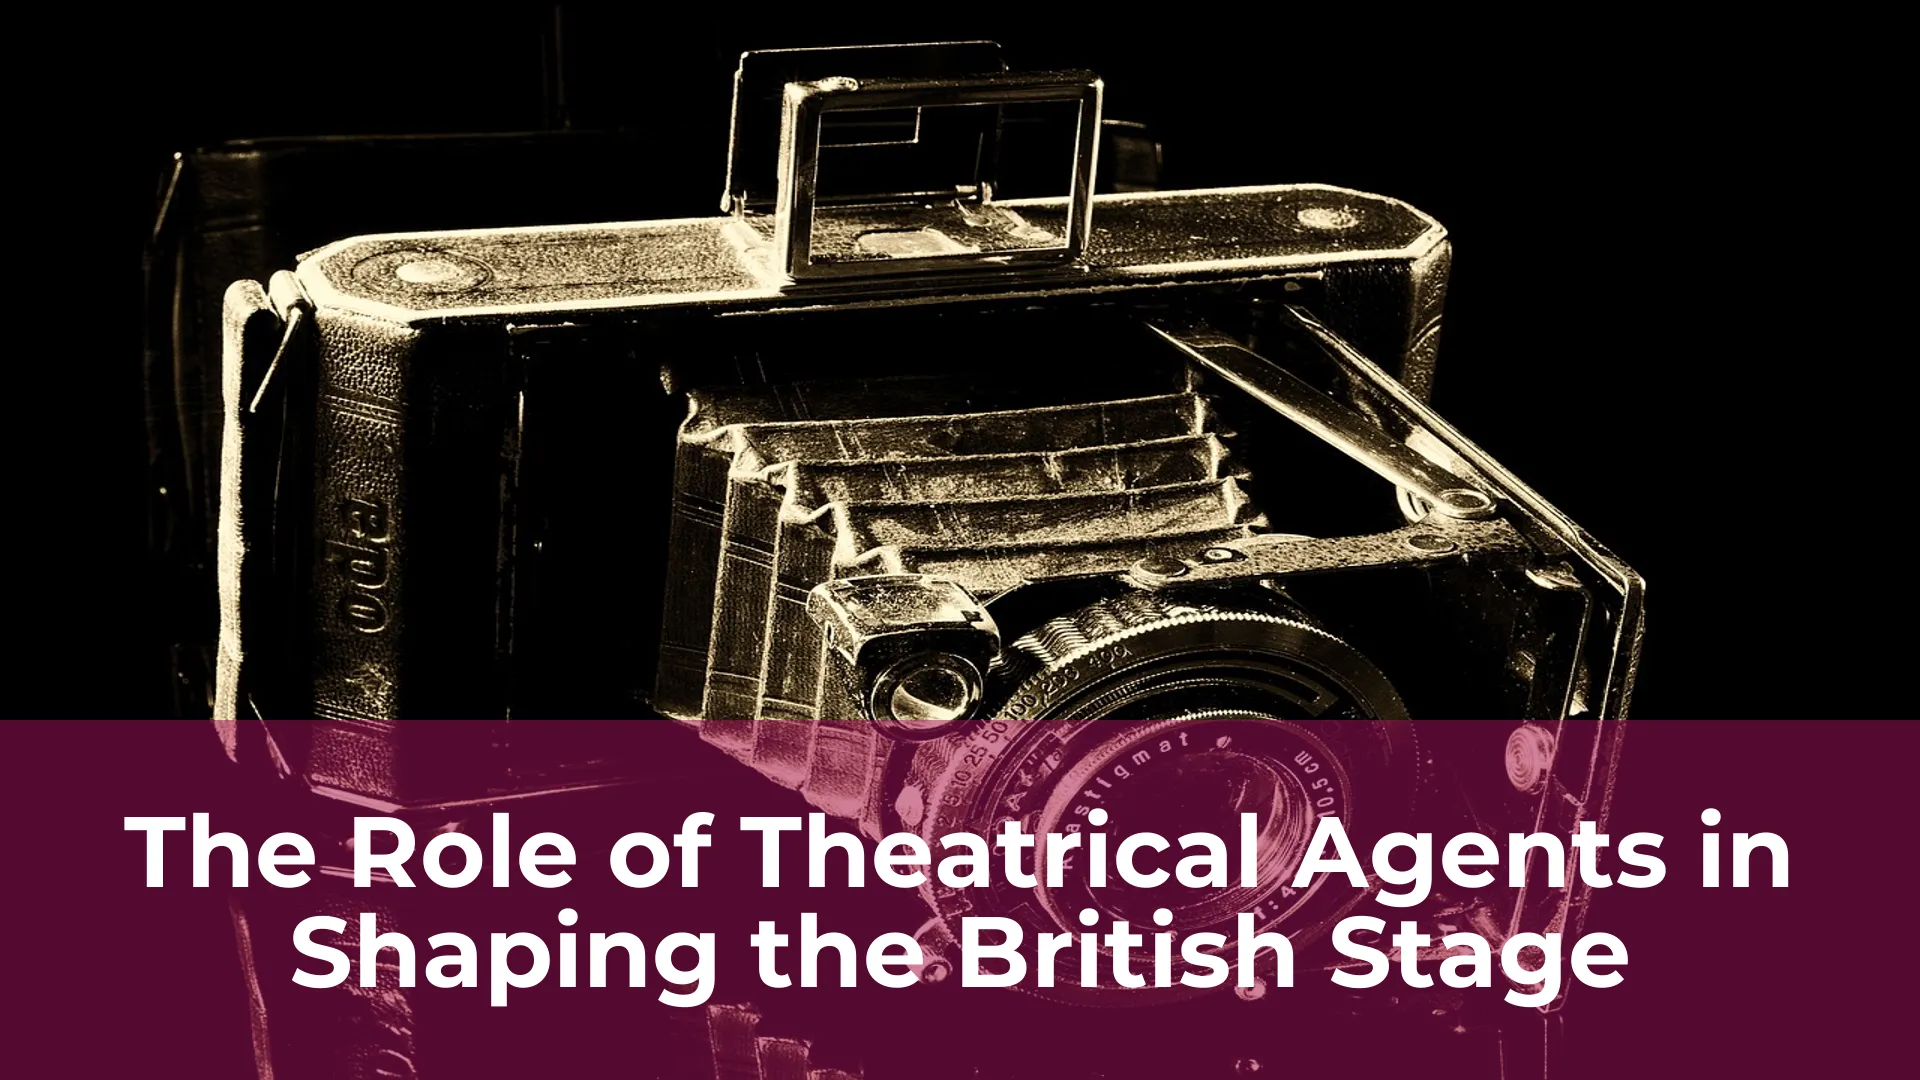 The role of theatrical agents in shaping the british stage